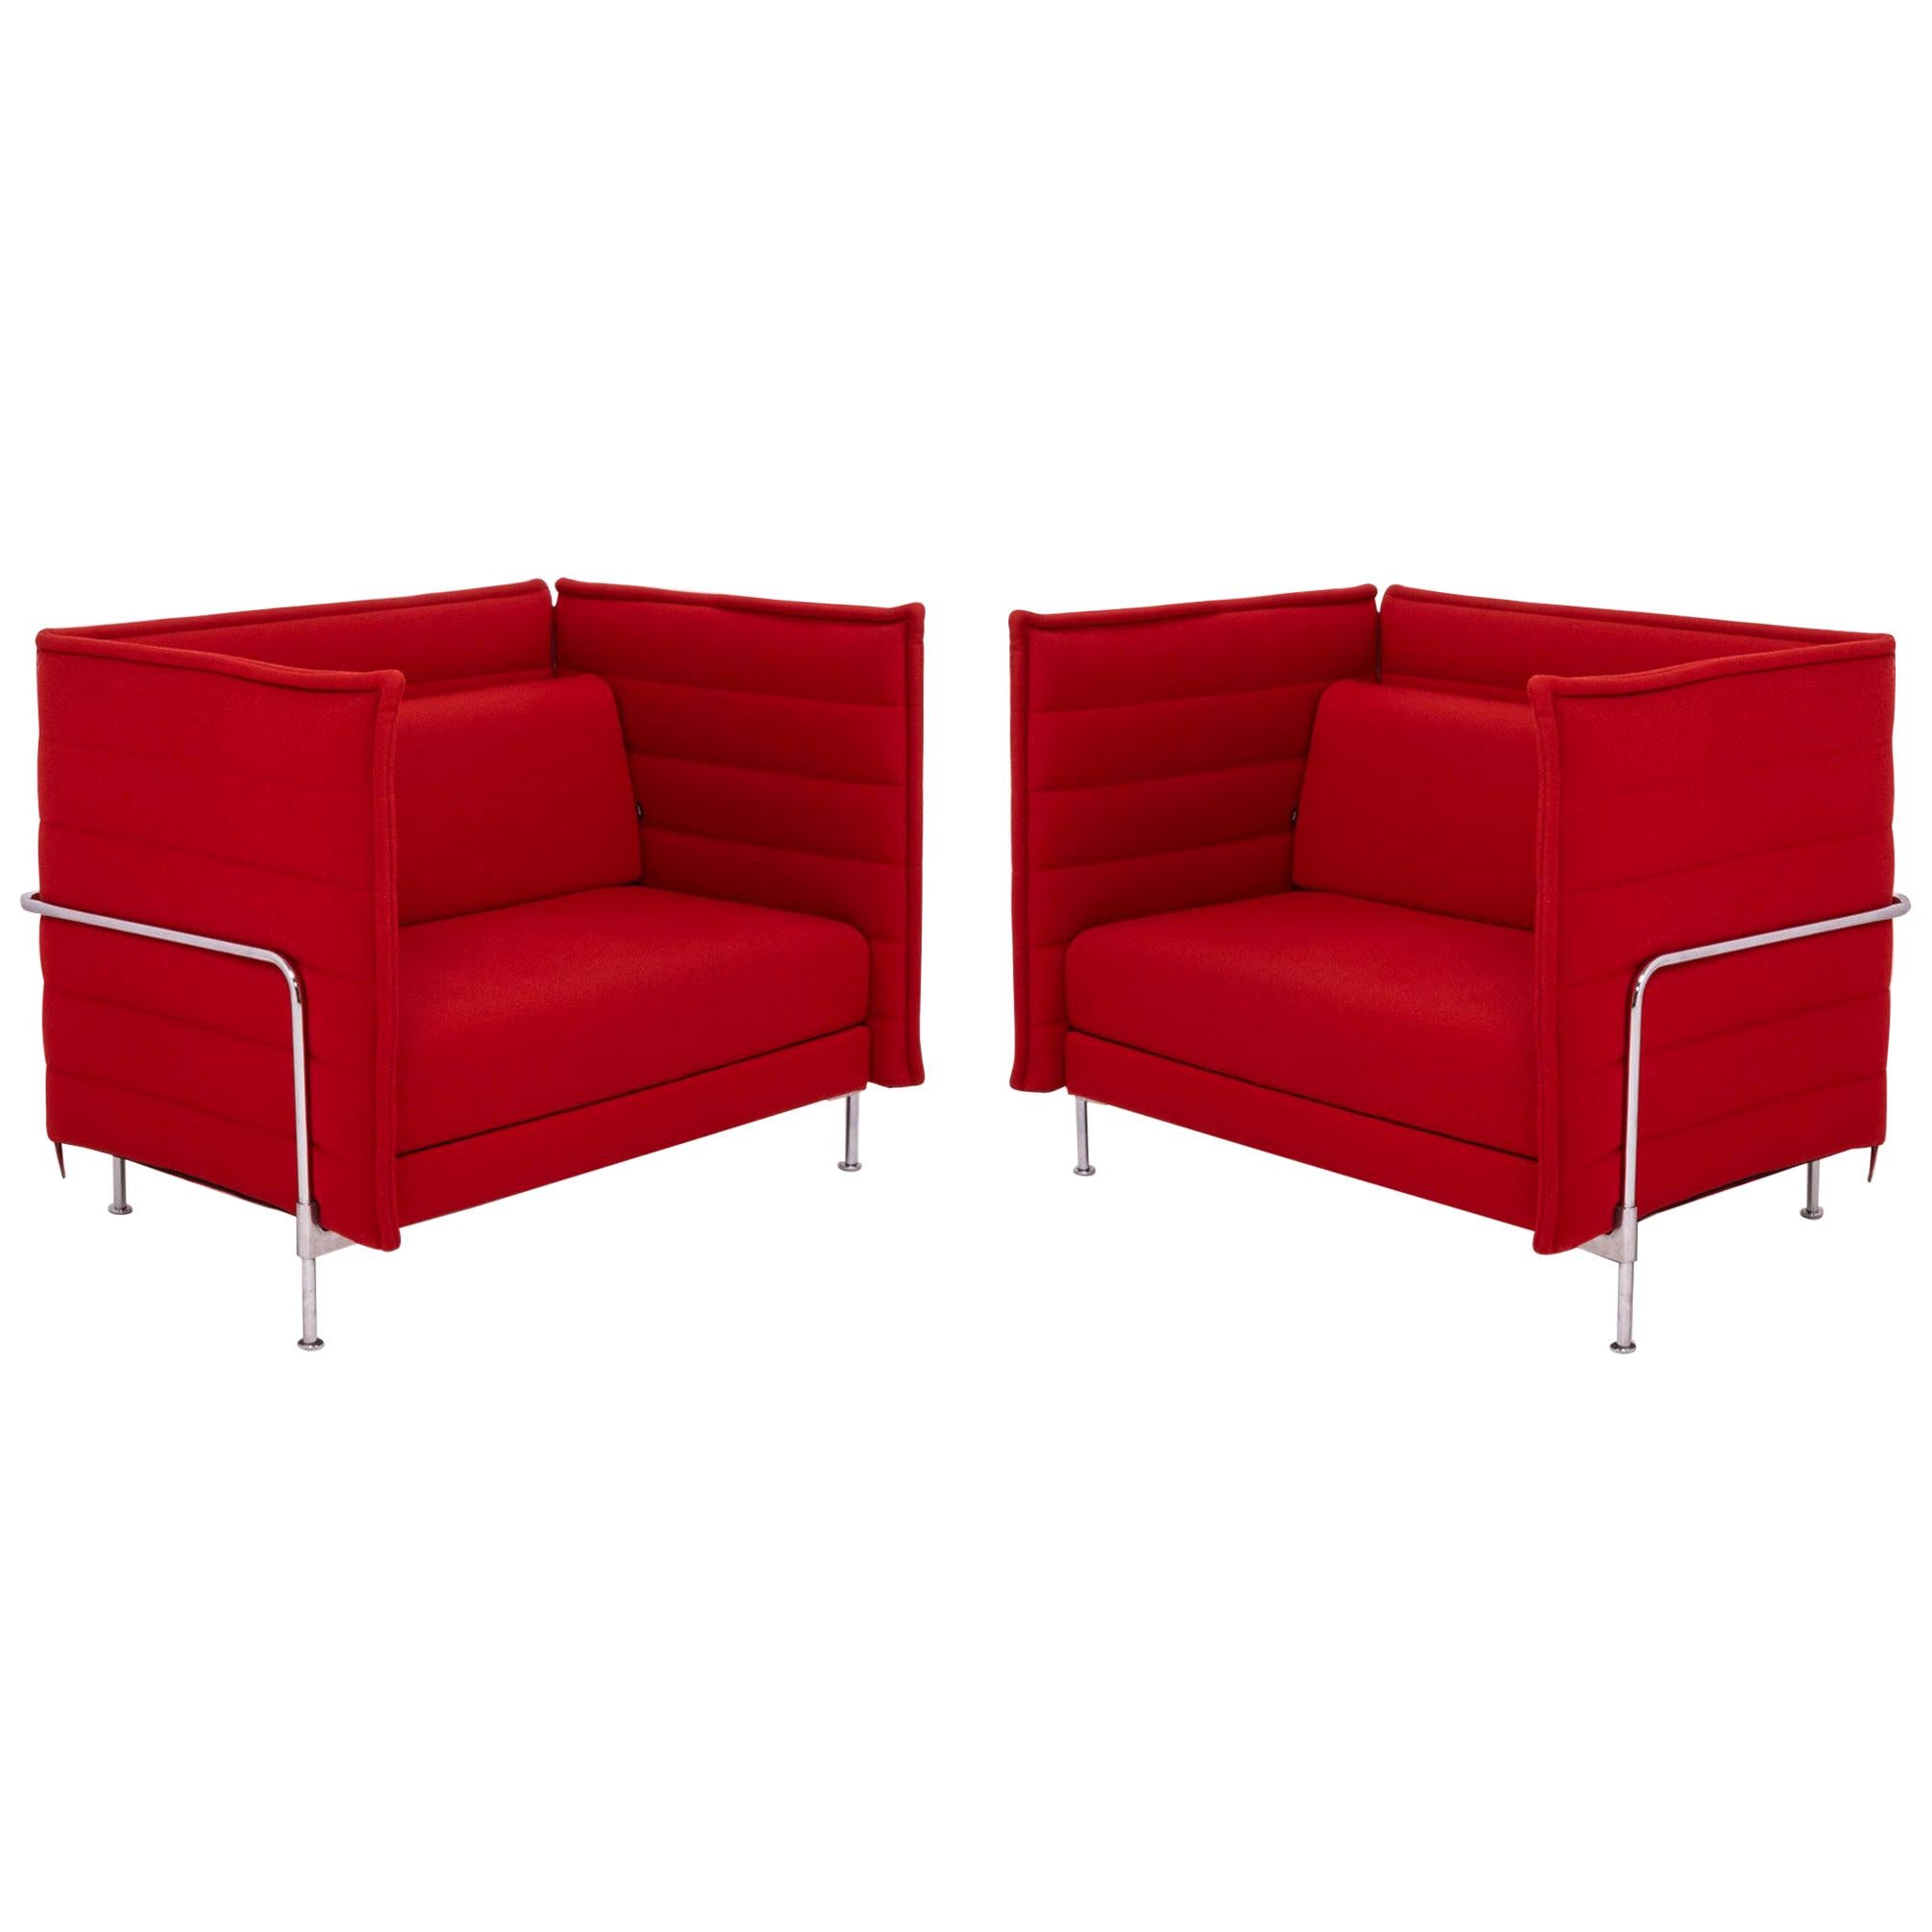 Vitra Alcove Red Loveseat Sofa by Ronan & Erwan Bouroullec, Set of 2